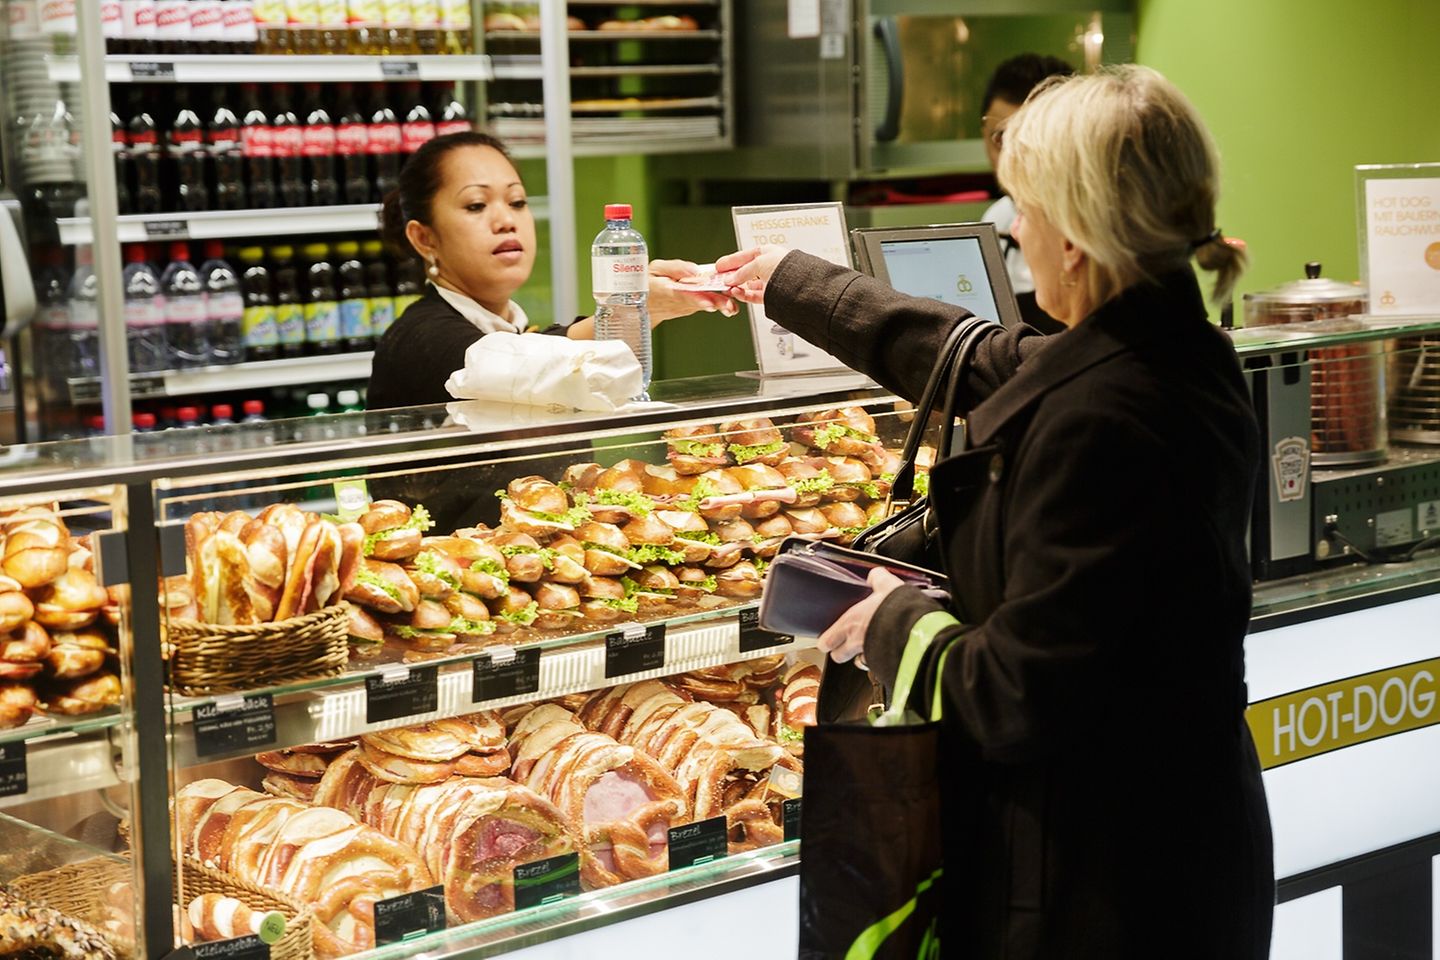 A woman in a black coat hands money to a woman behind a shop counter, which is equipped with buns.